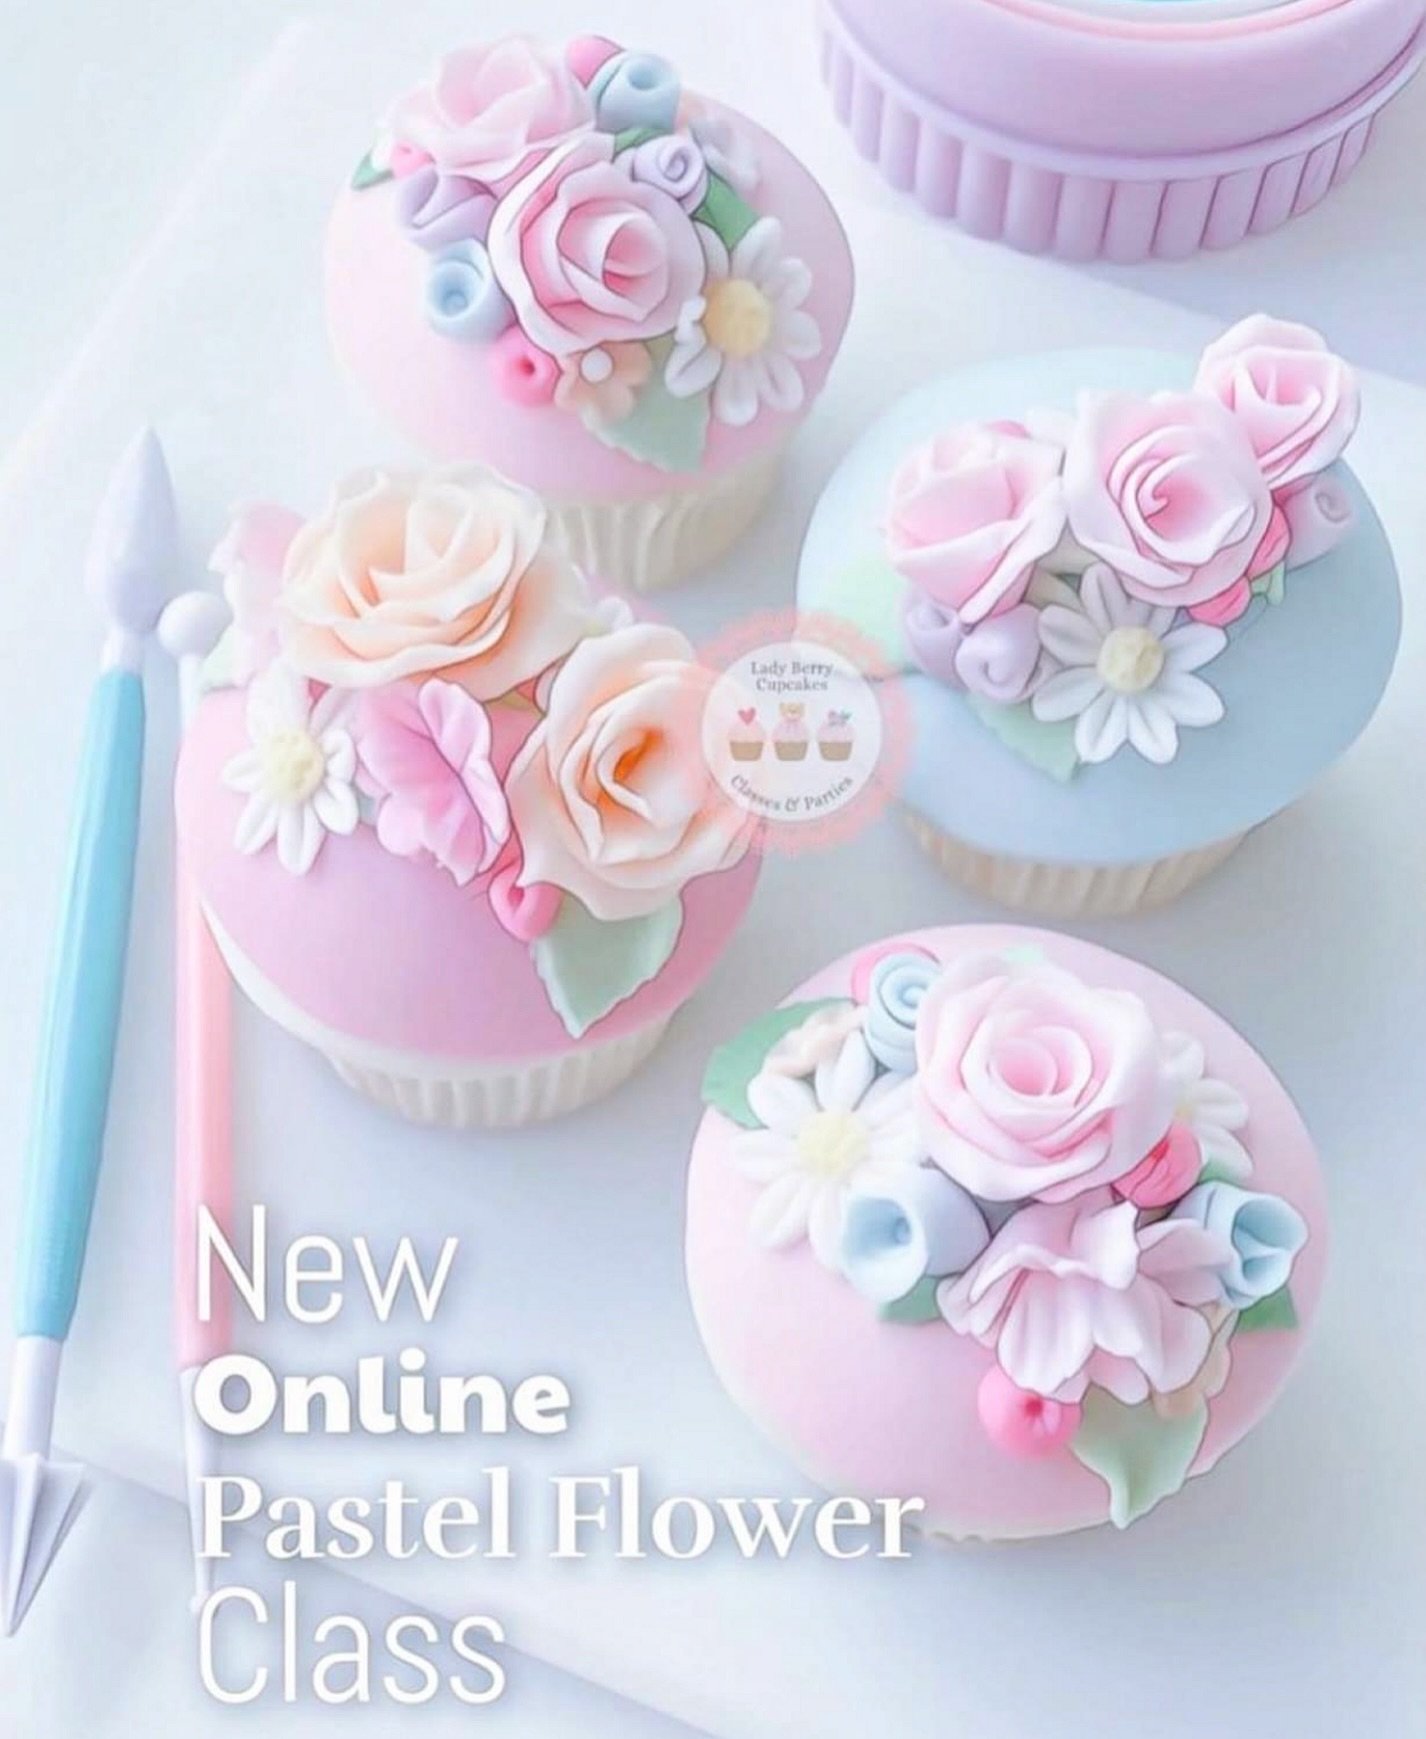 🌸 Try the Online Video class for this Collection of pretty yet simple fondant flowers! 

🧁 You can then  use these flowers to decorate your cakes, cupcakes and cookies for your customers &amp; loved ones! 

⭐️ Browse 160 online video classes at www